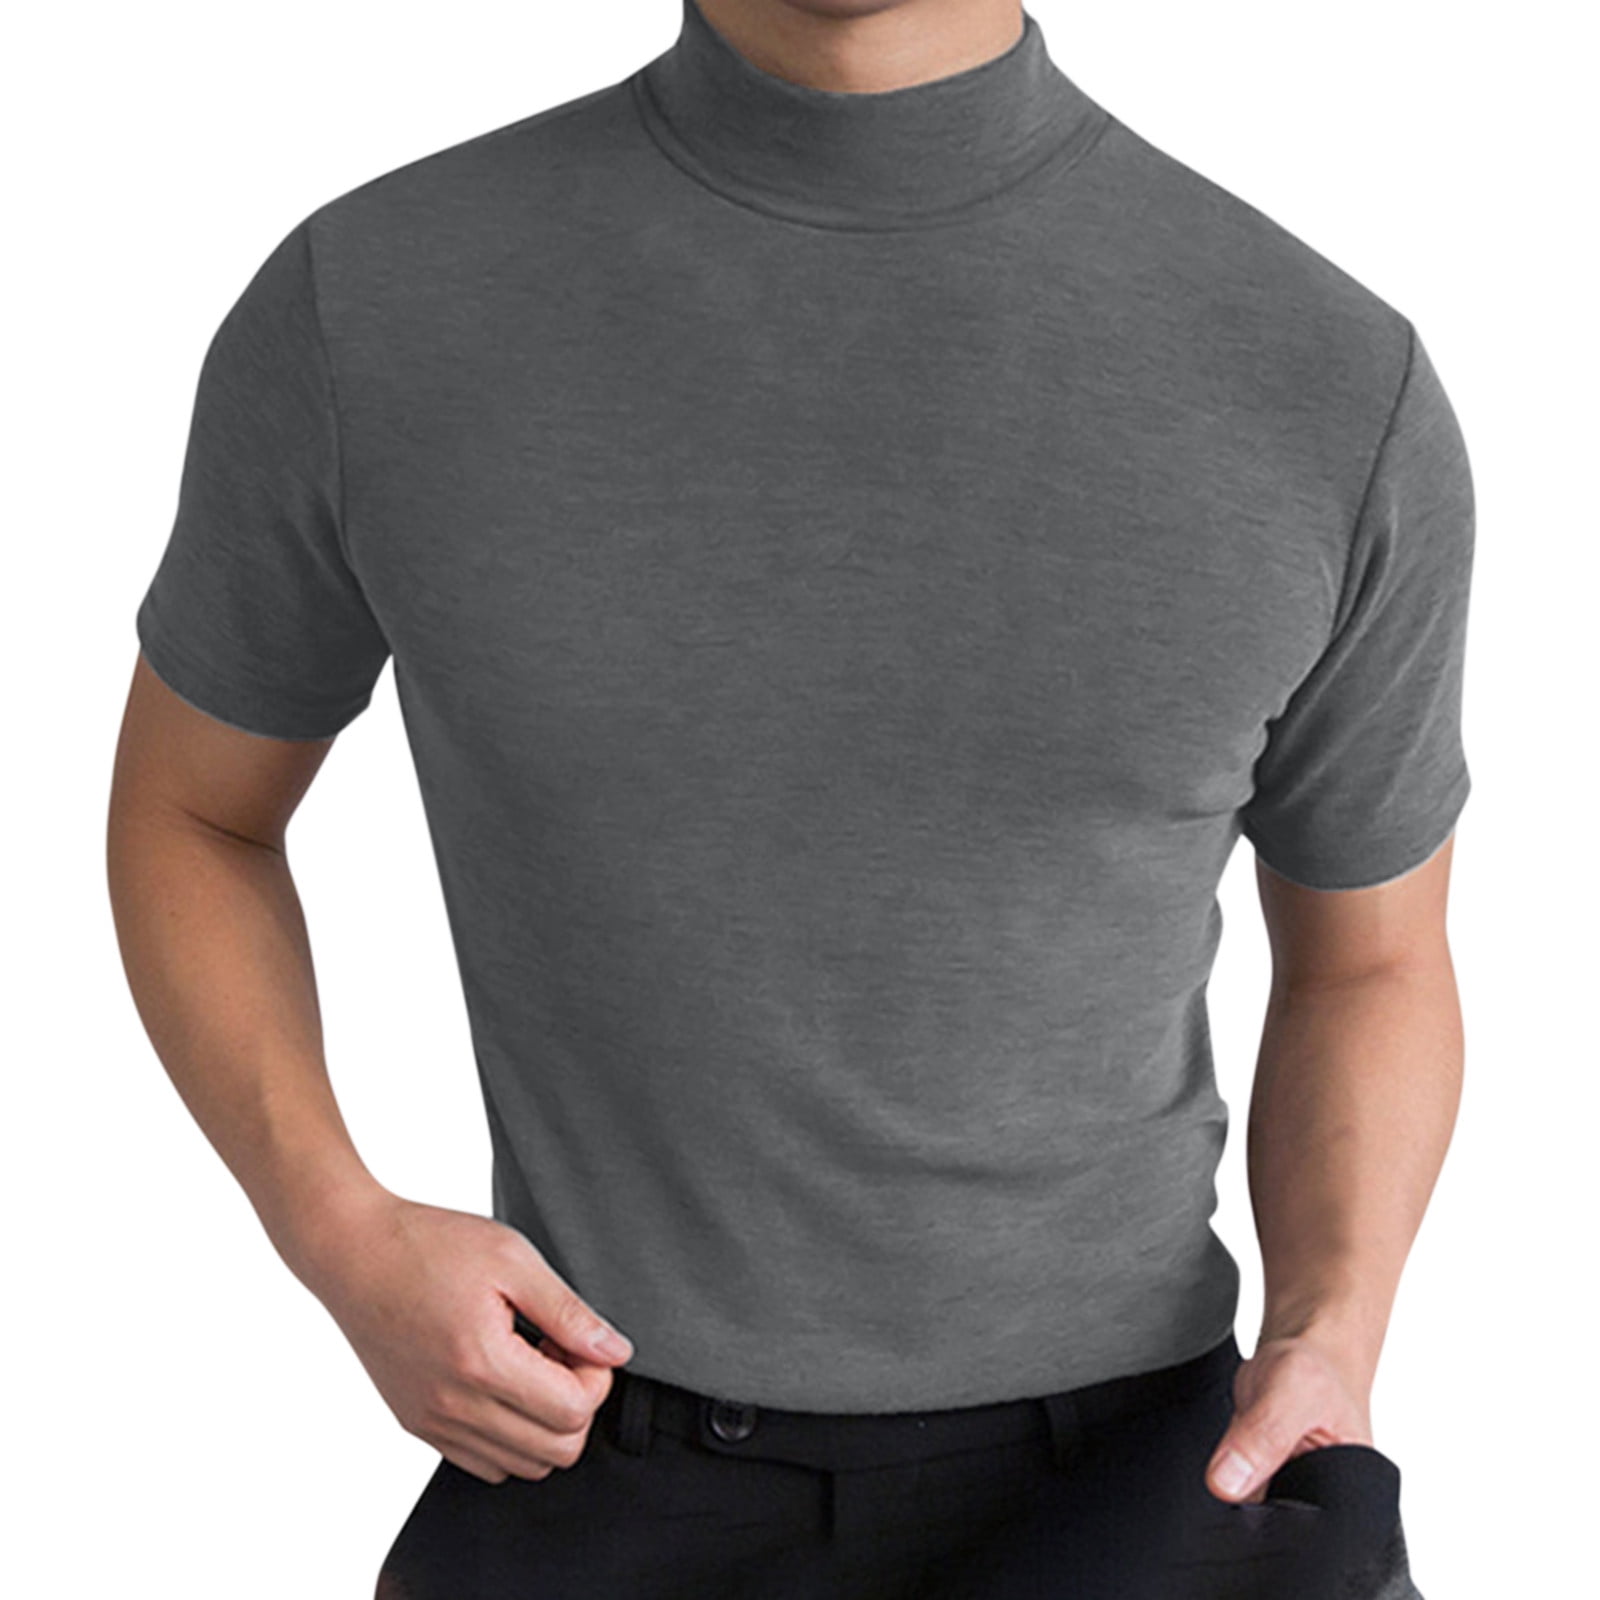 White Compression Shirts – betheopportunity